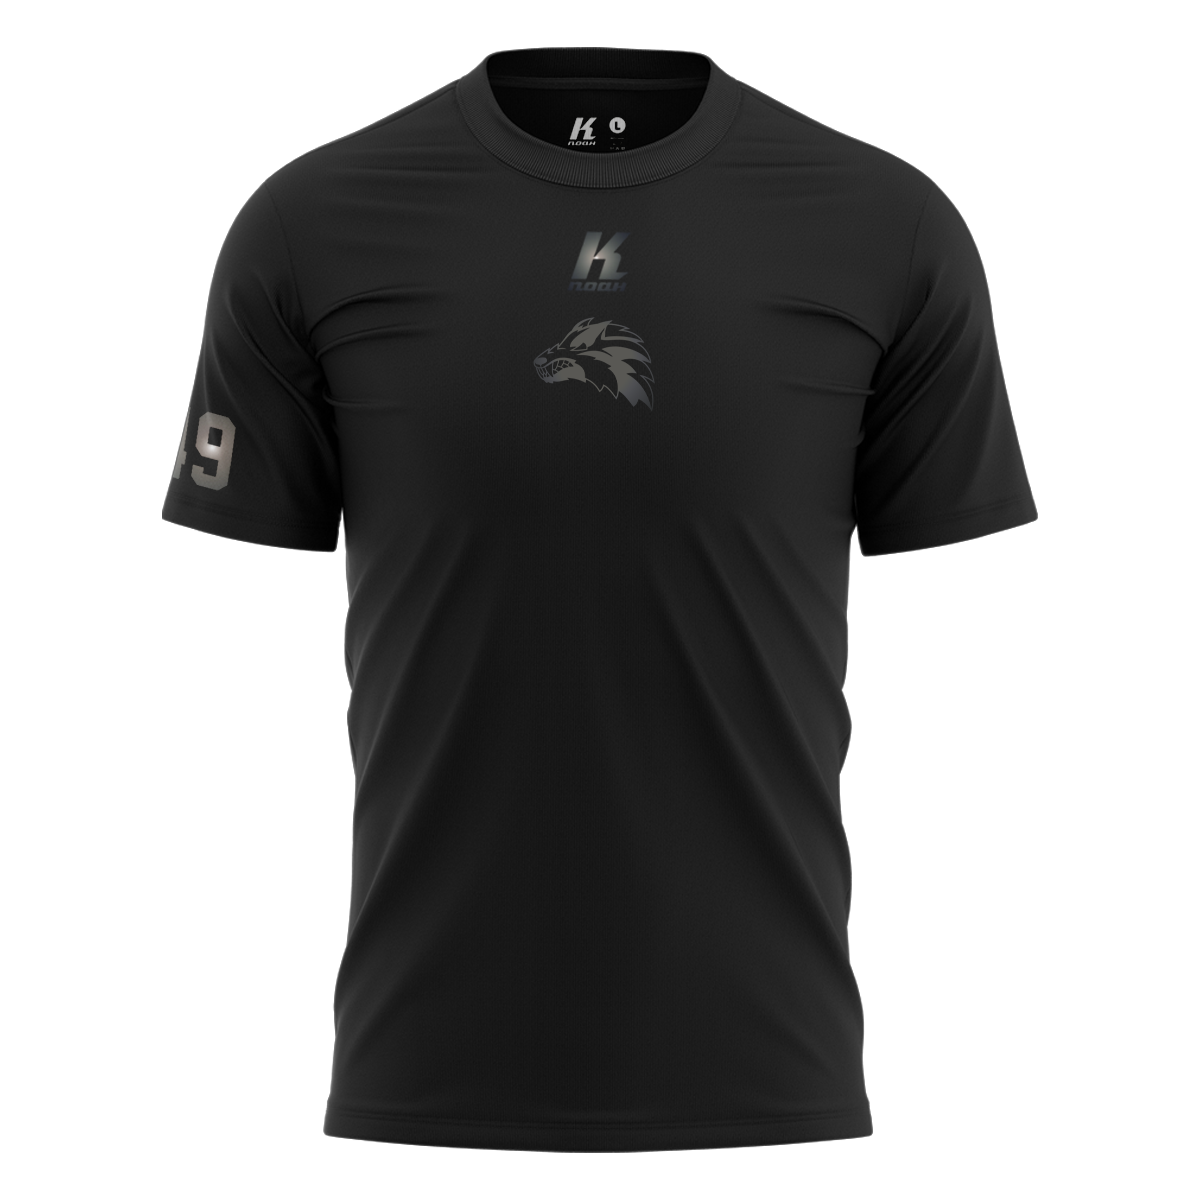 Wolves "Blackline" K.Tech Sports Tee S8000 with Playernumber/Initials